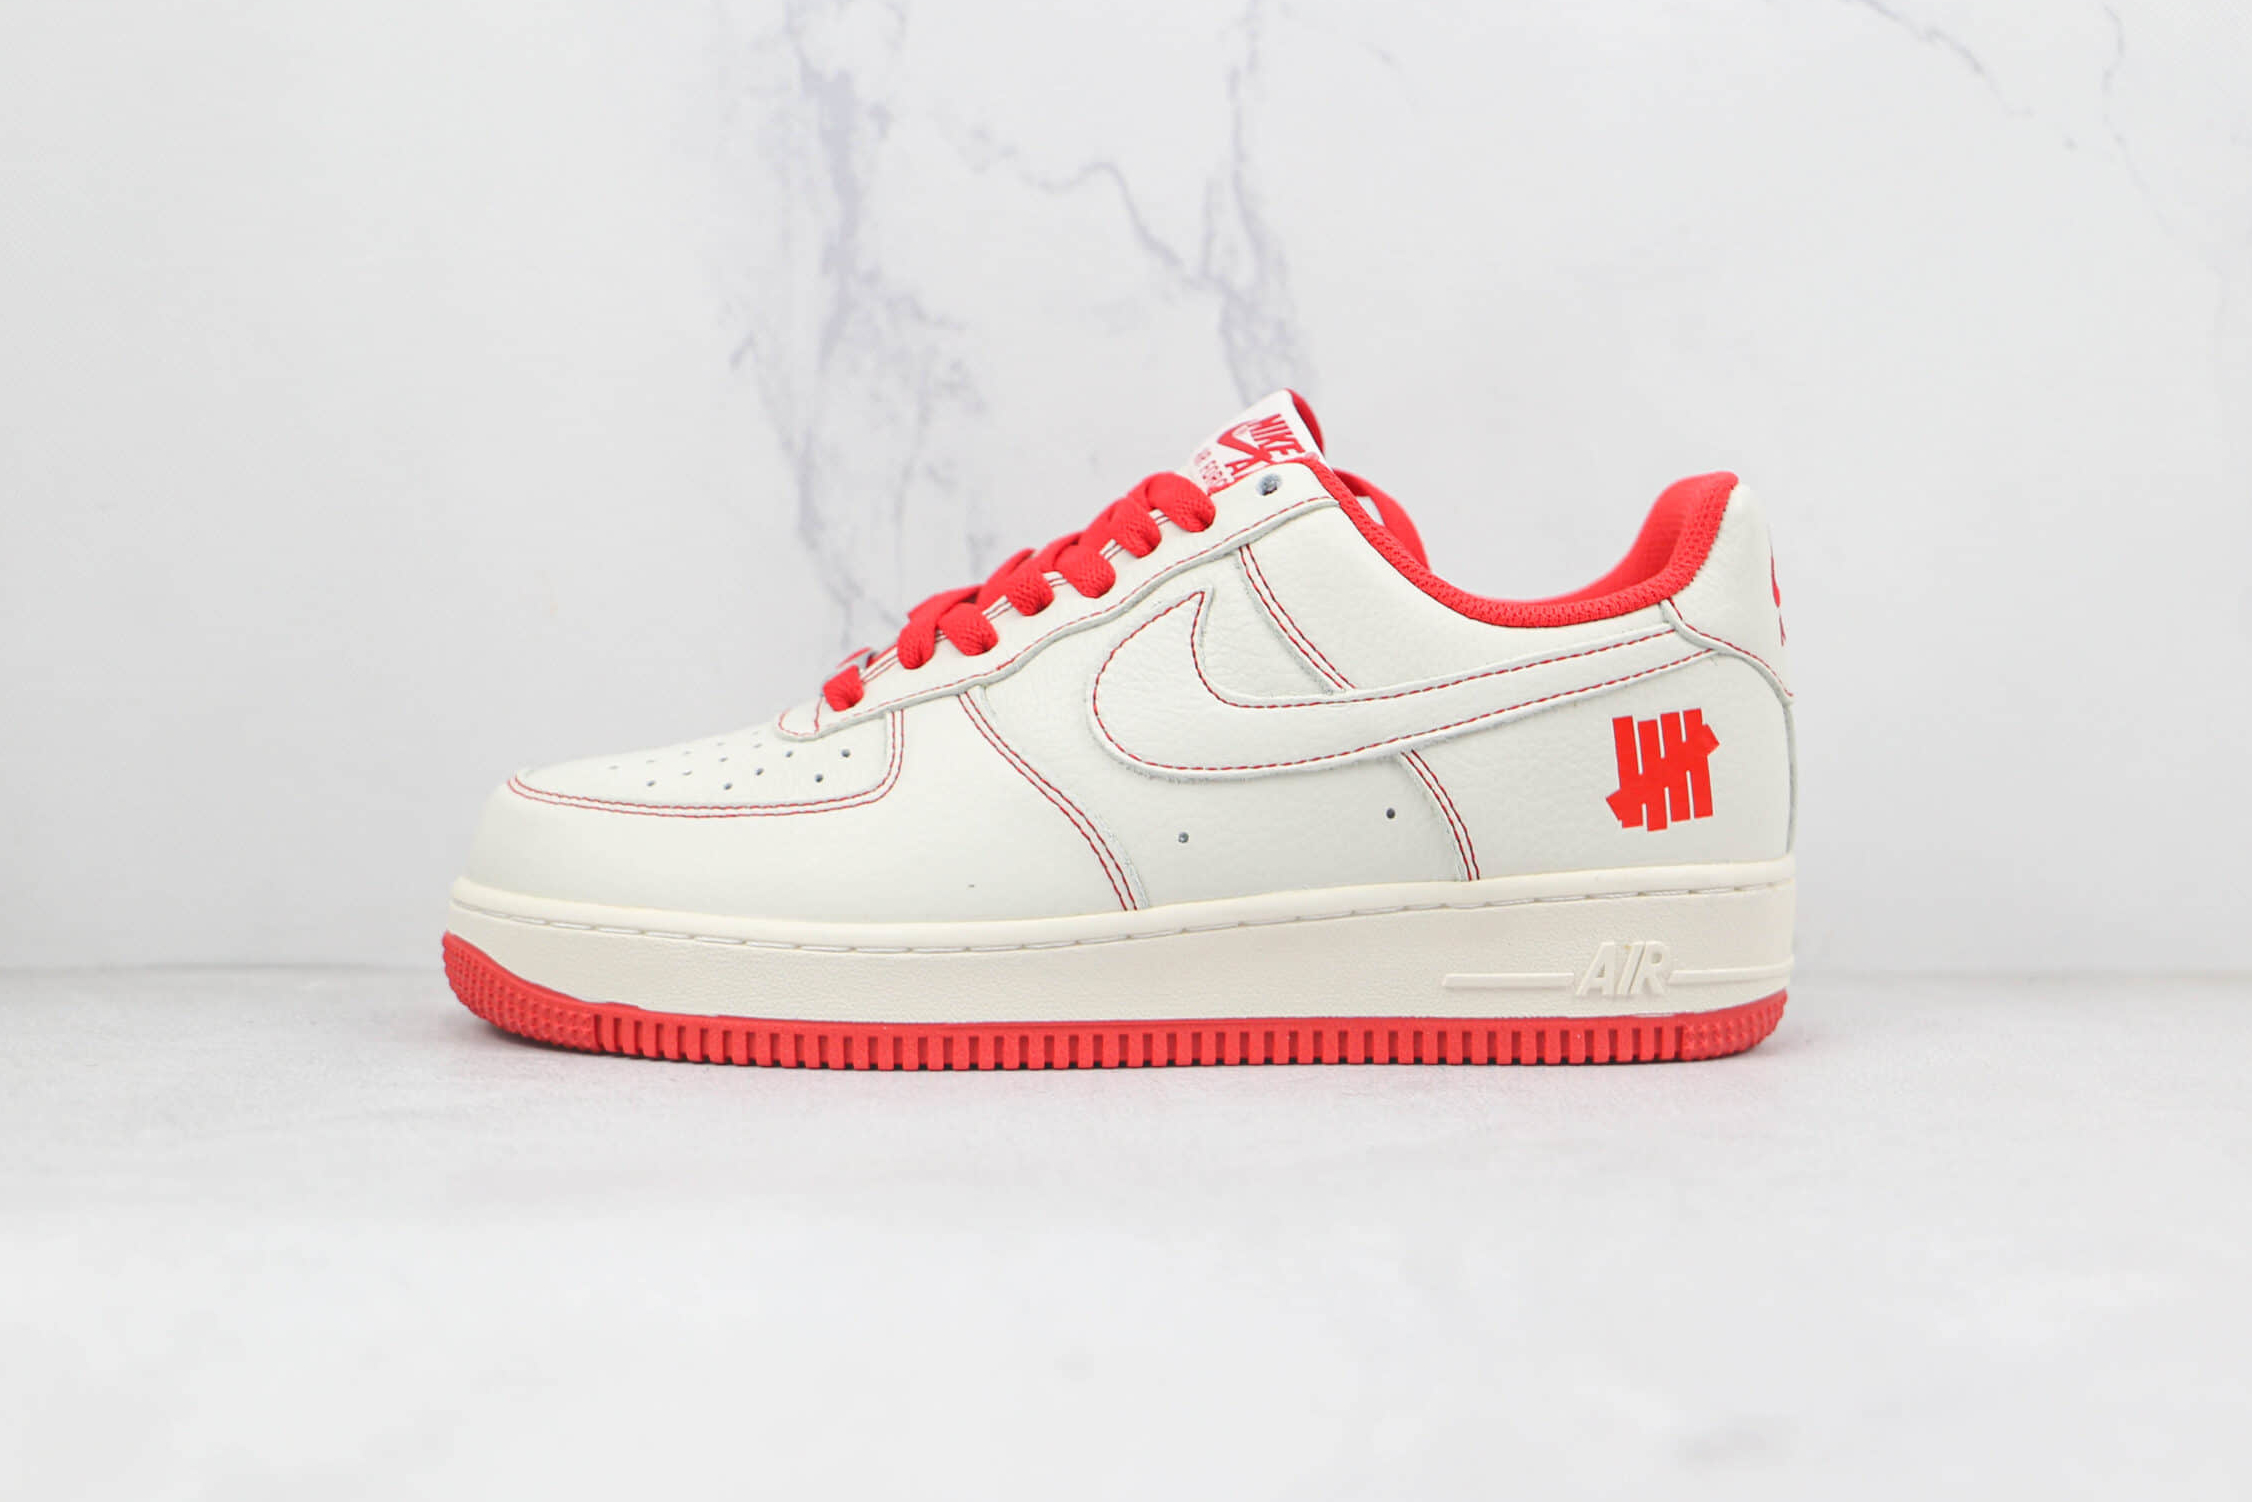 Undefeated x Nike AF1 07 Low Beige Red White UN1315-801 - Exclusive Collaboration, Limited Stock!